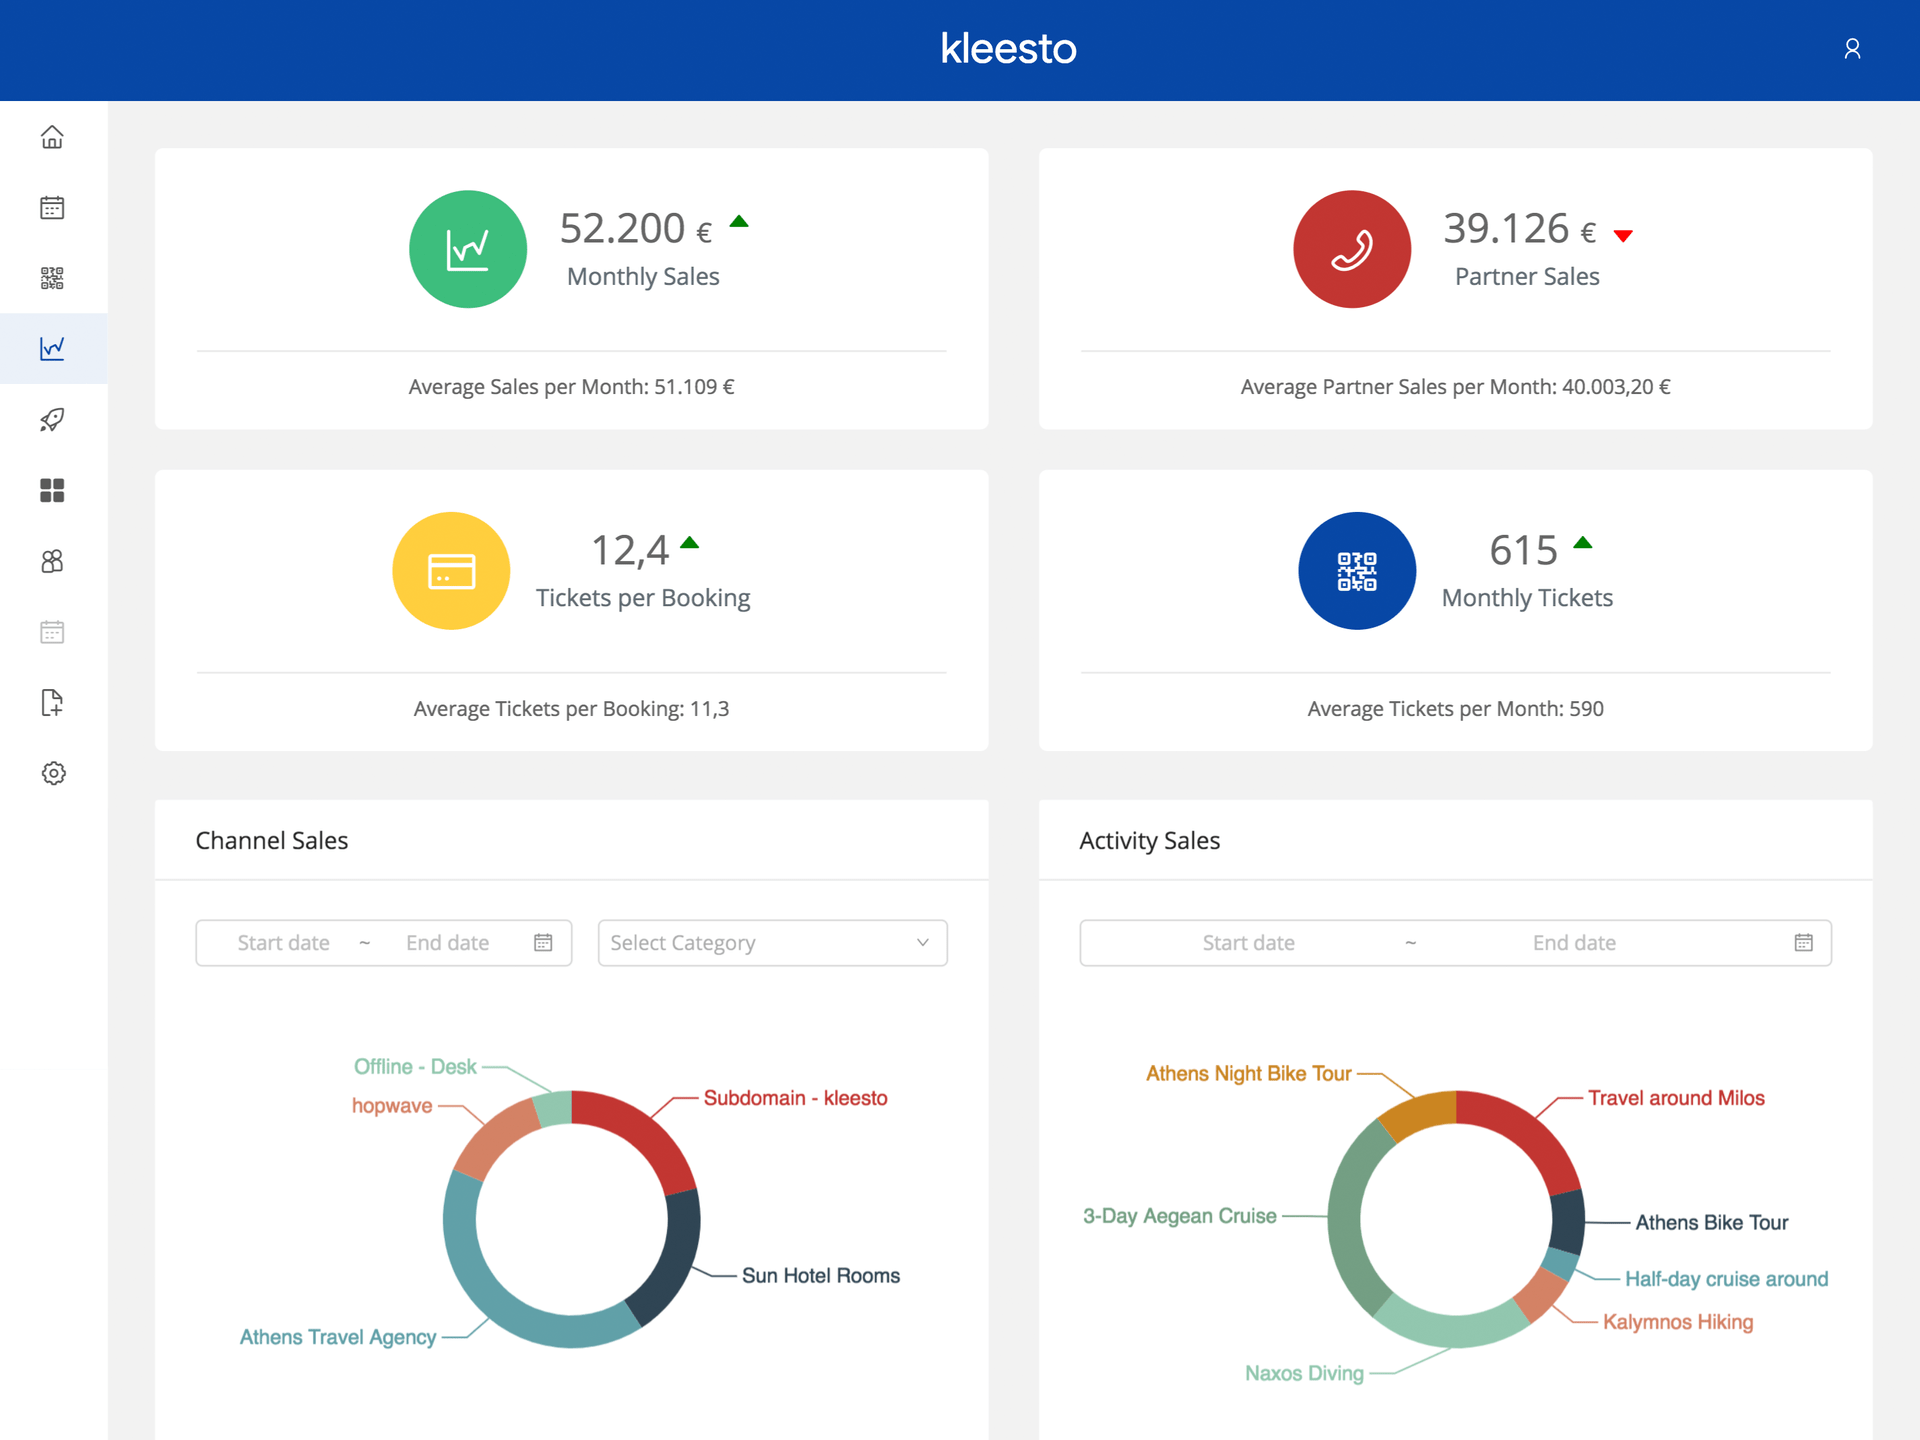 A dashboard displaying various business metrics such as sales figures, average partner sales, boat rental tickets per booking, and monthly tickets, along with pie charts of service categories and activity sales distribution. | kleesto